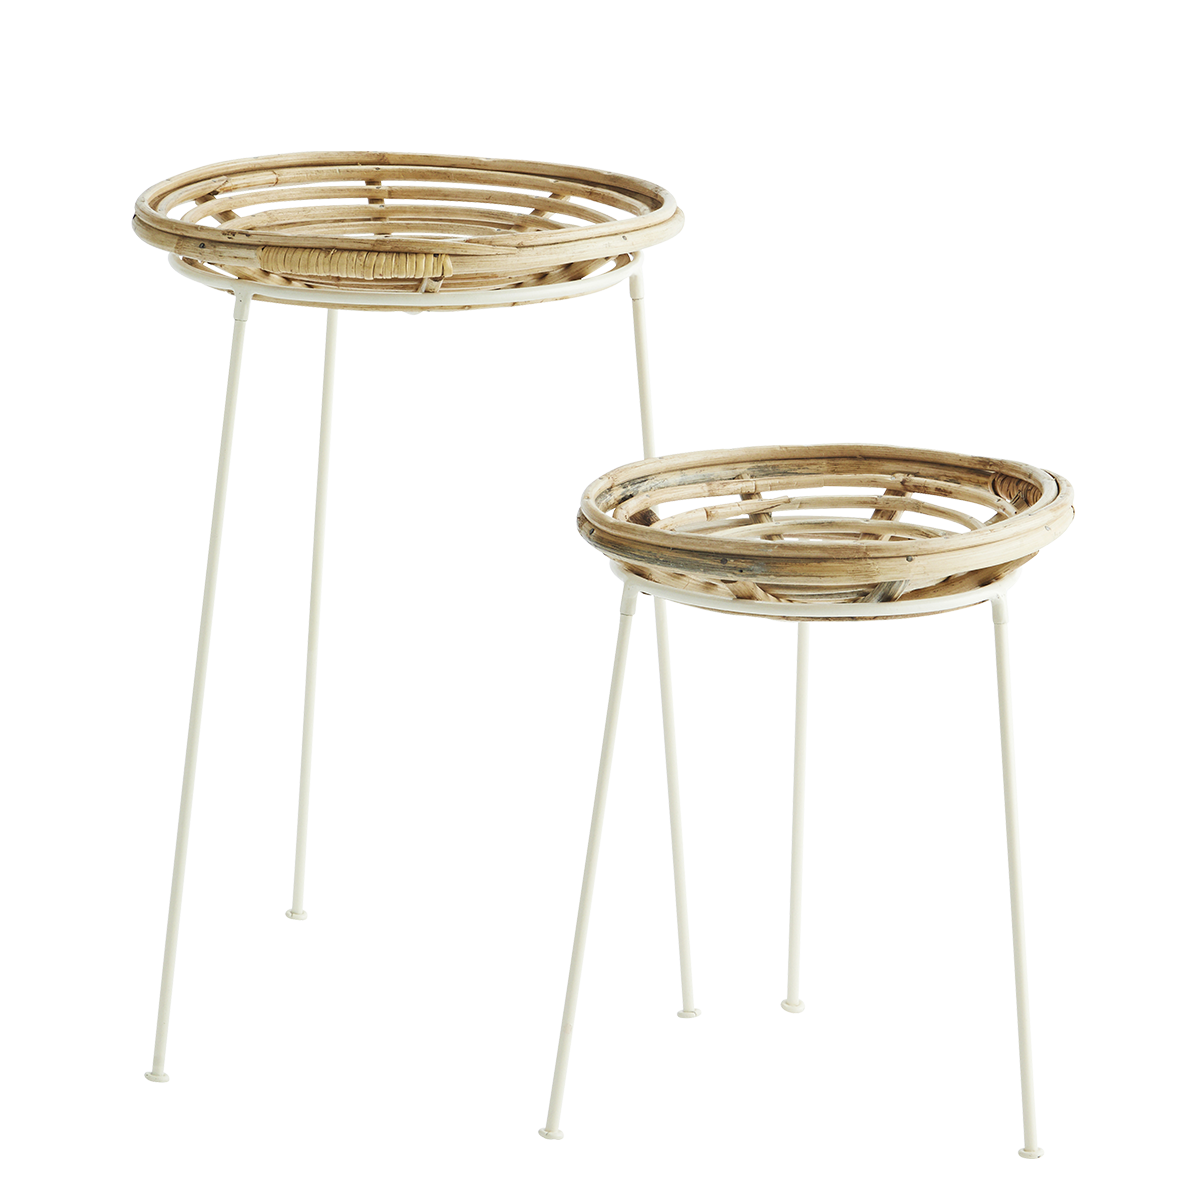 Bamboo plant stands